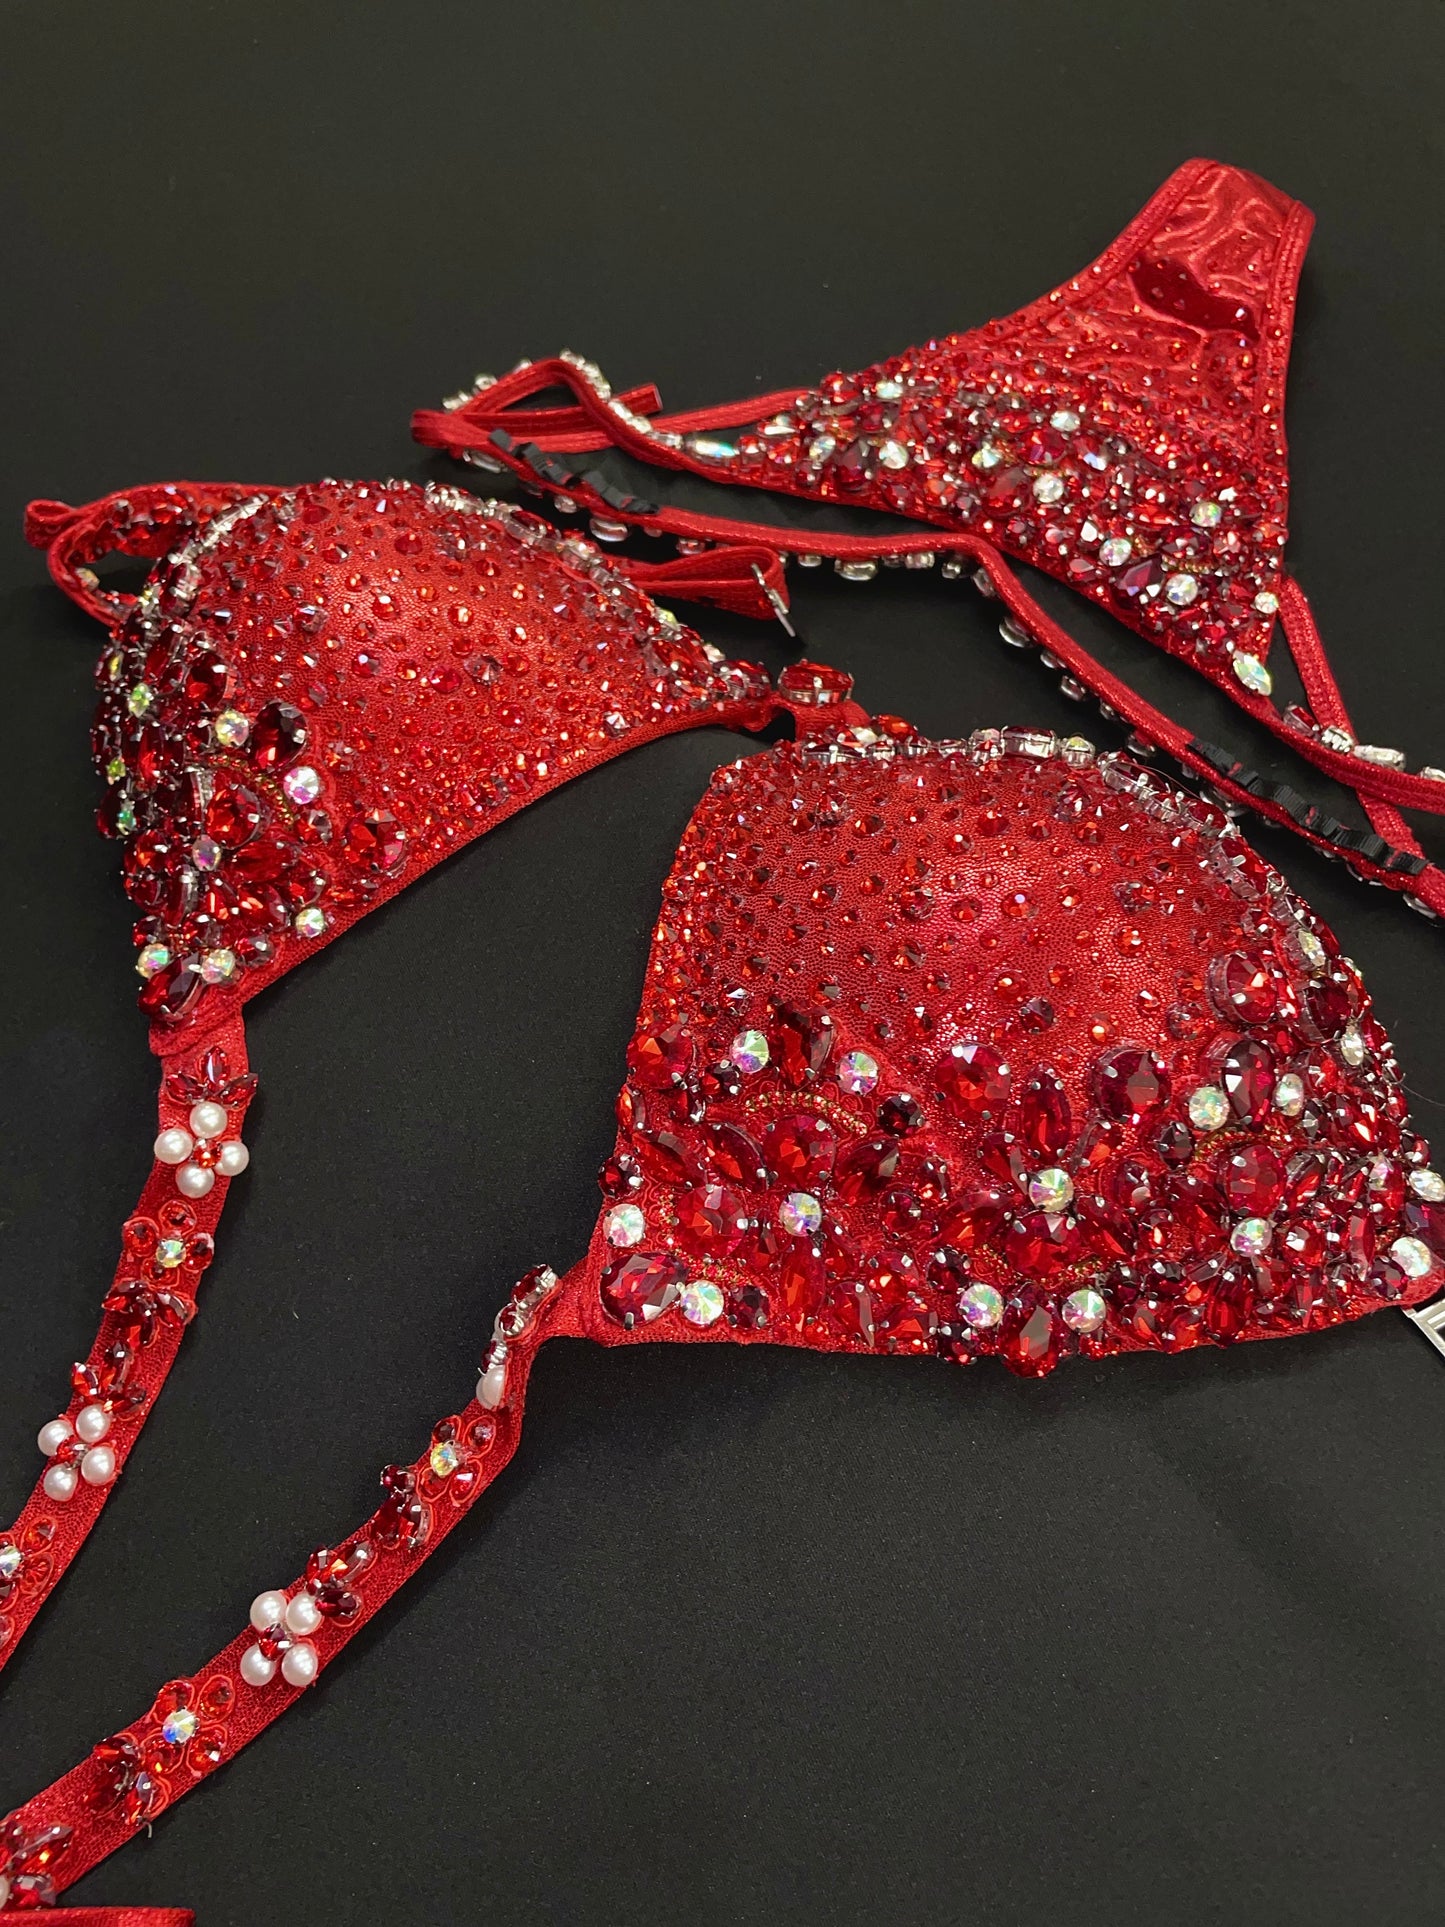 Red on Red WBFF/DIVA Suit (TN444)